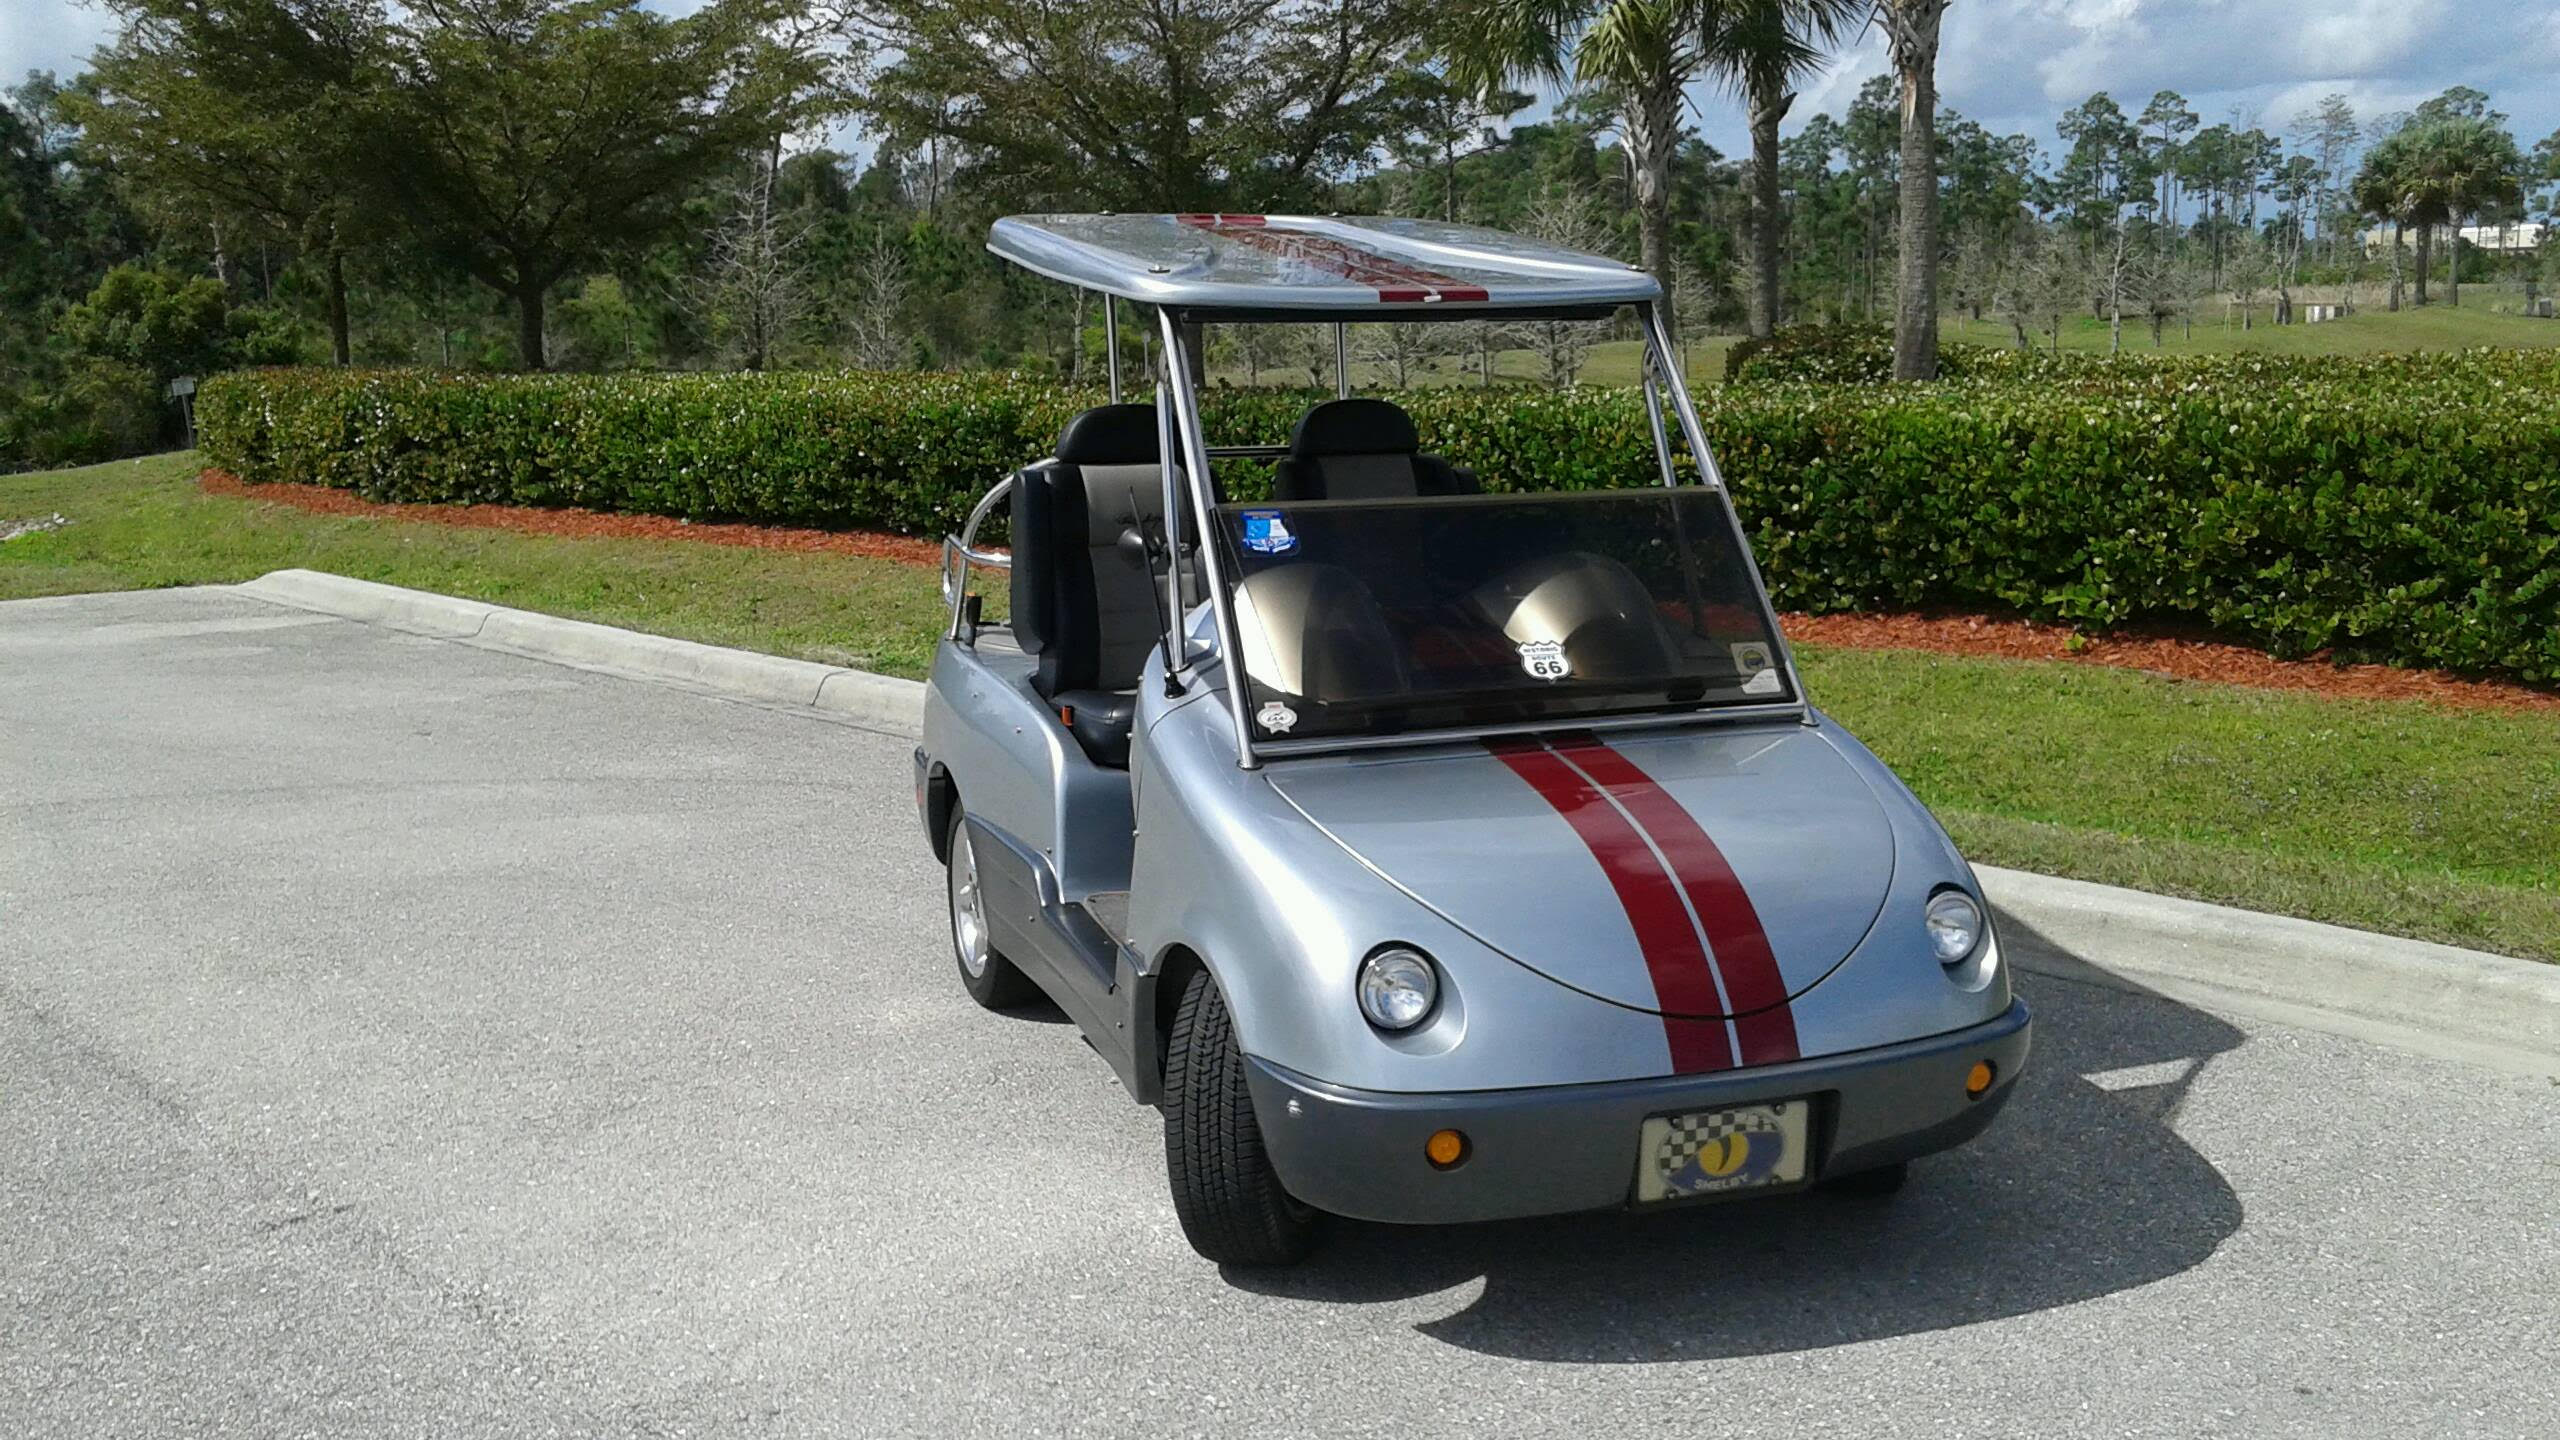 Gator Golf Cars | Only Authorized Club Car Dealer in Naples-Fort Myers